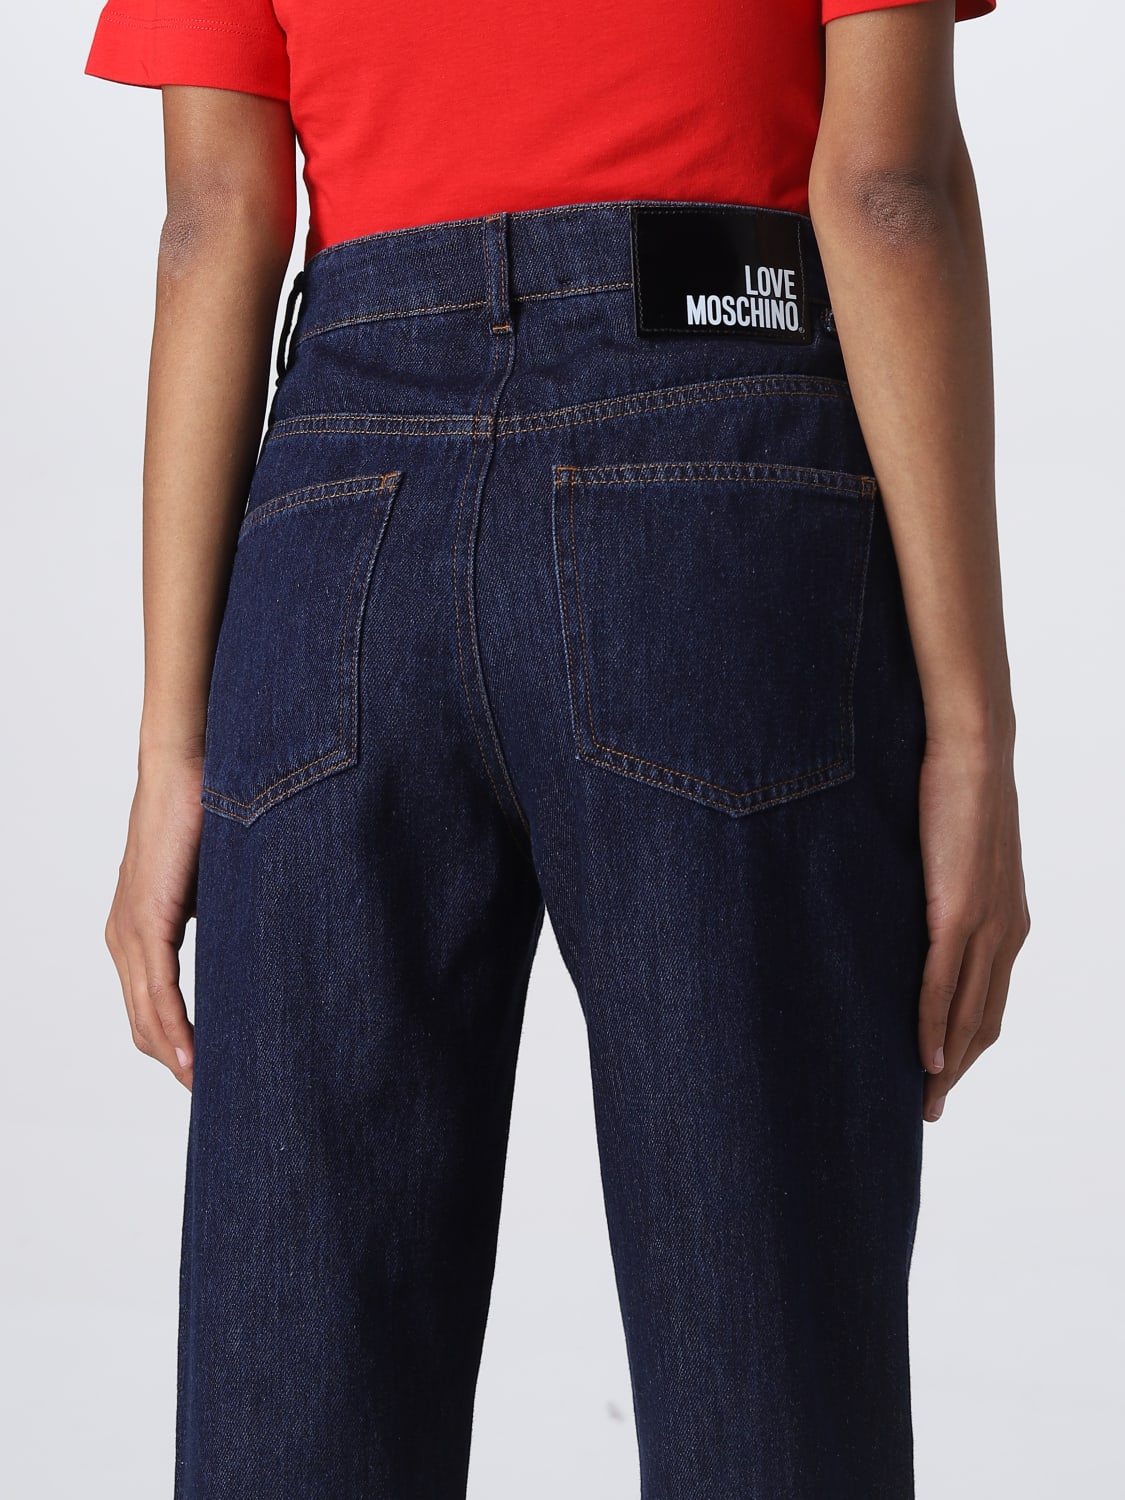 Love Moschino Outlet: jeans for - Denim Love Moschino jeans WQ48501T9860 online